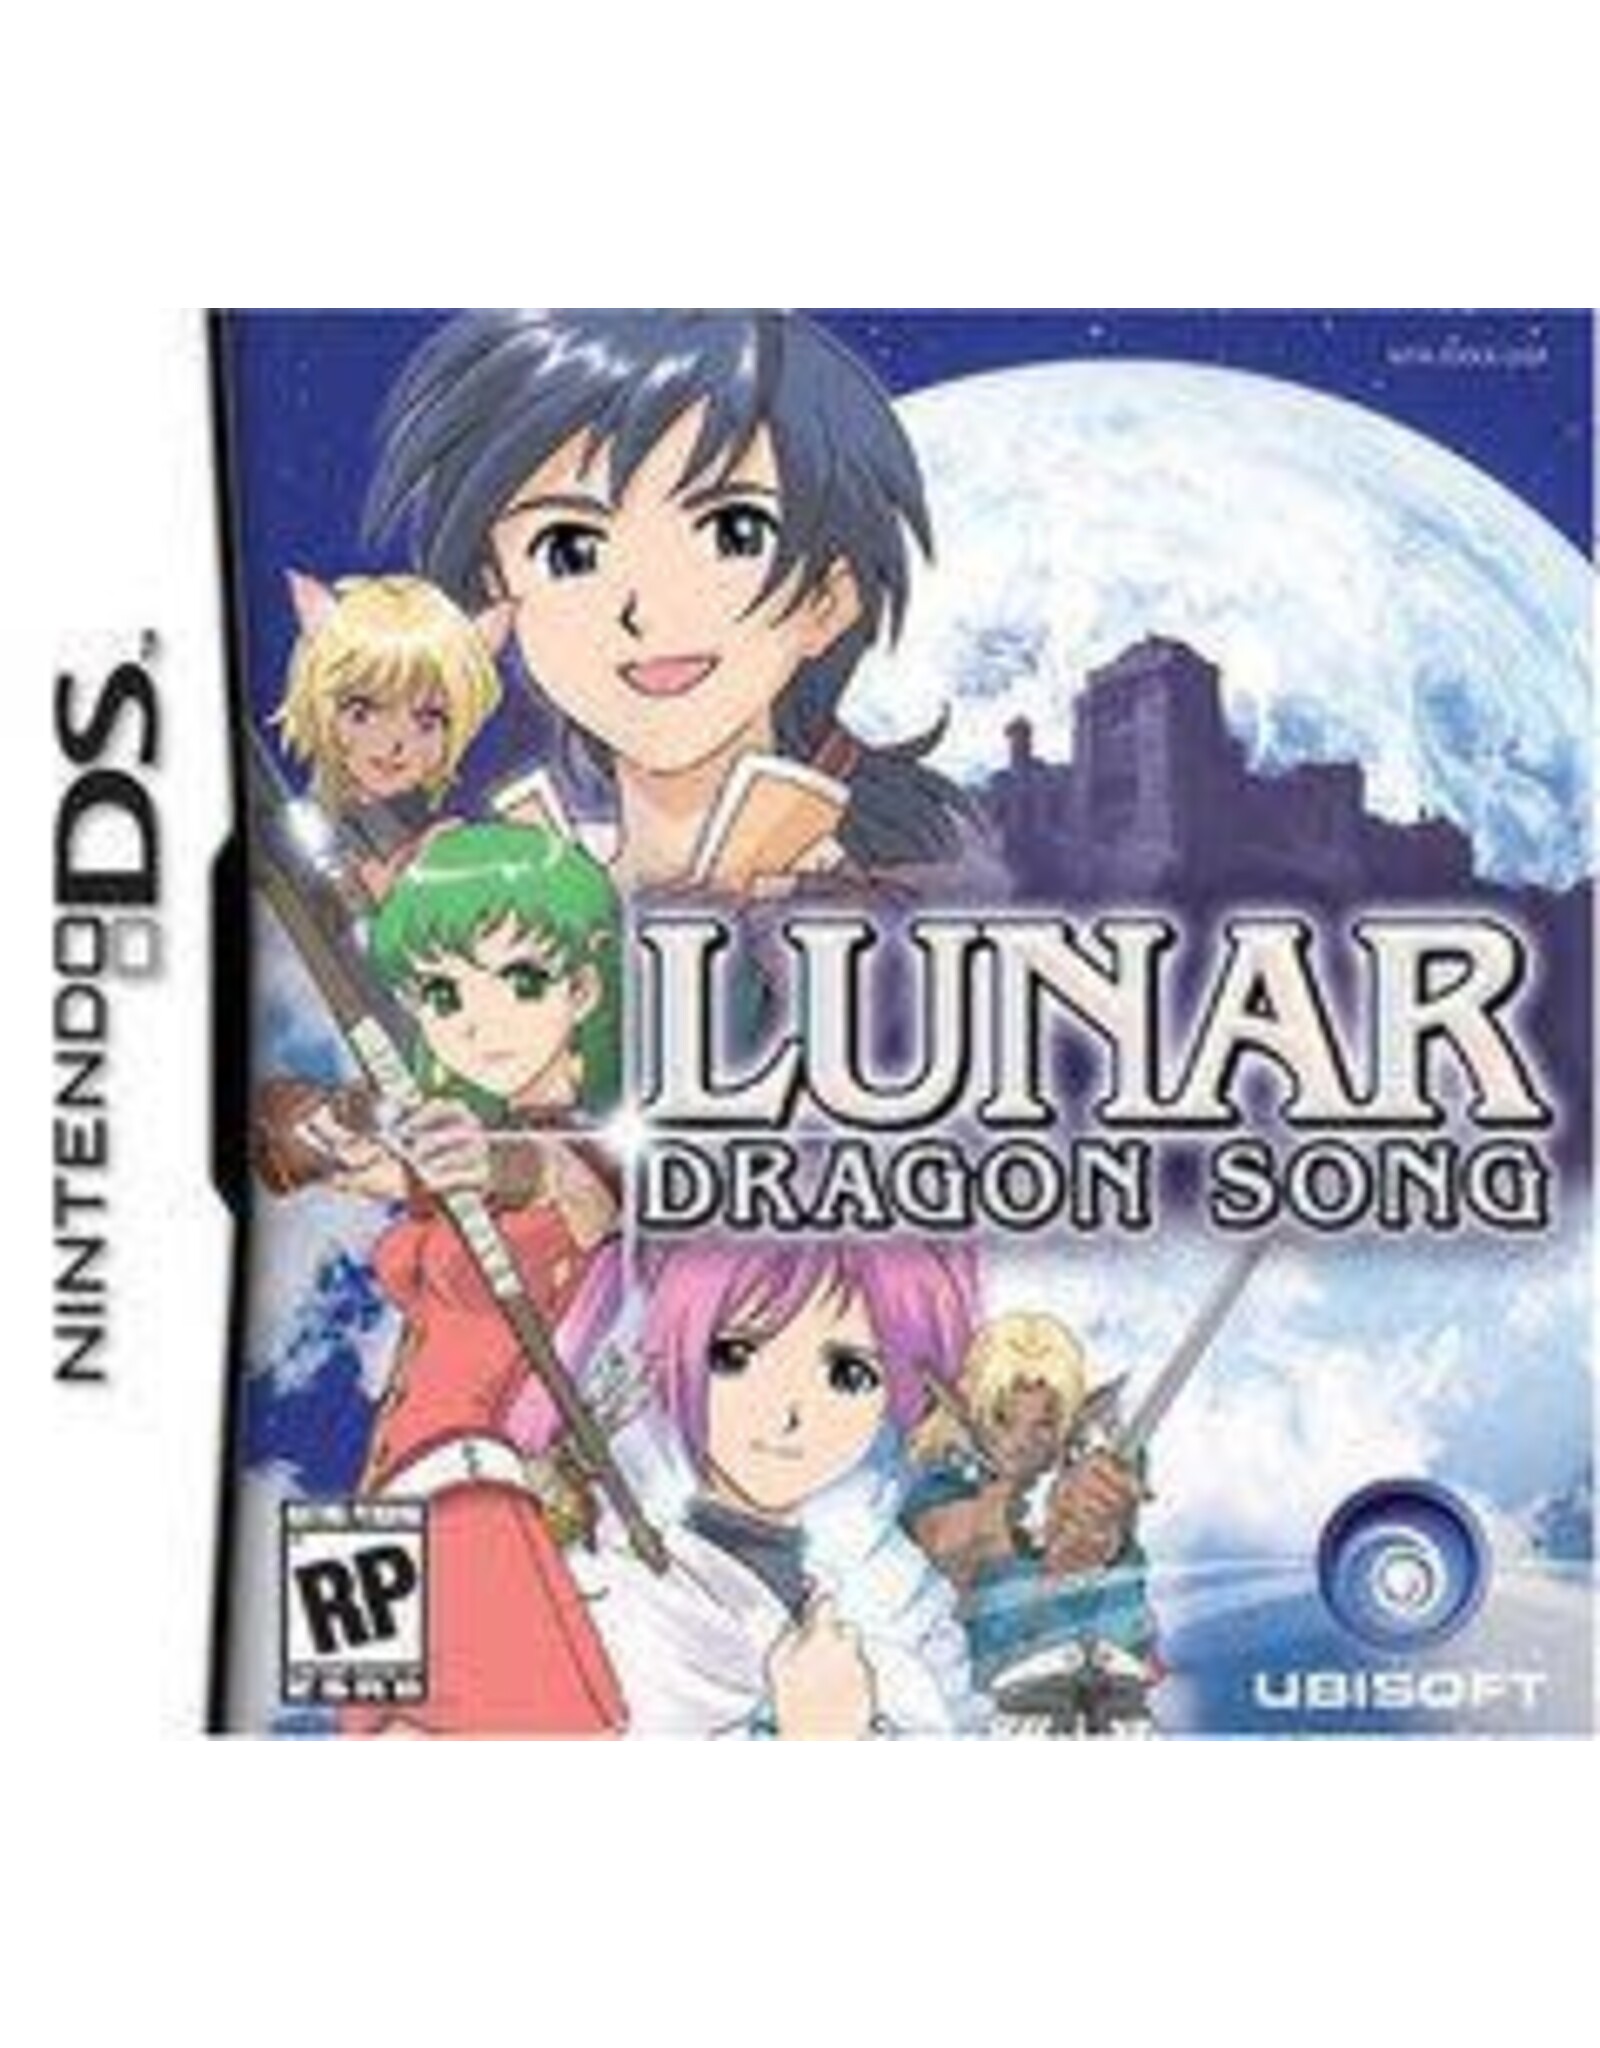 Nintendo DS Lunar Dragon Song (Used)